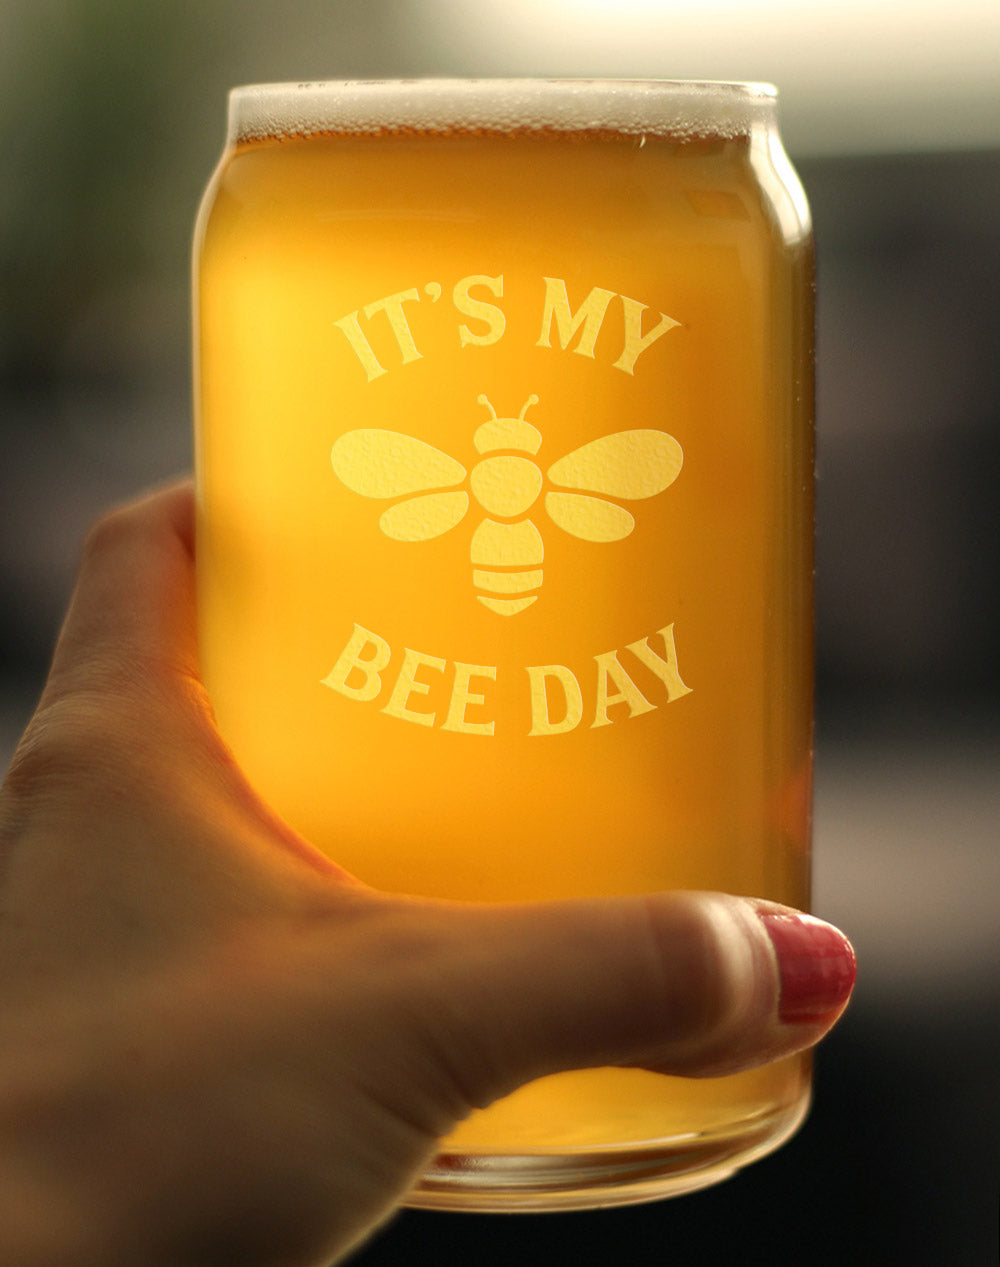 Bee Day - Funny Beer Can Pint Glass - Bumblebee Bday Party Decor for Men or Women Getting Older - 16 oz